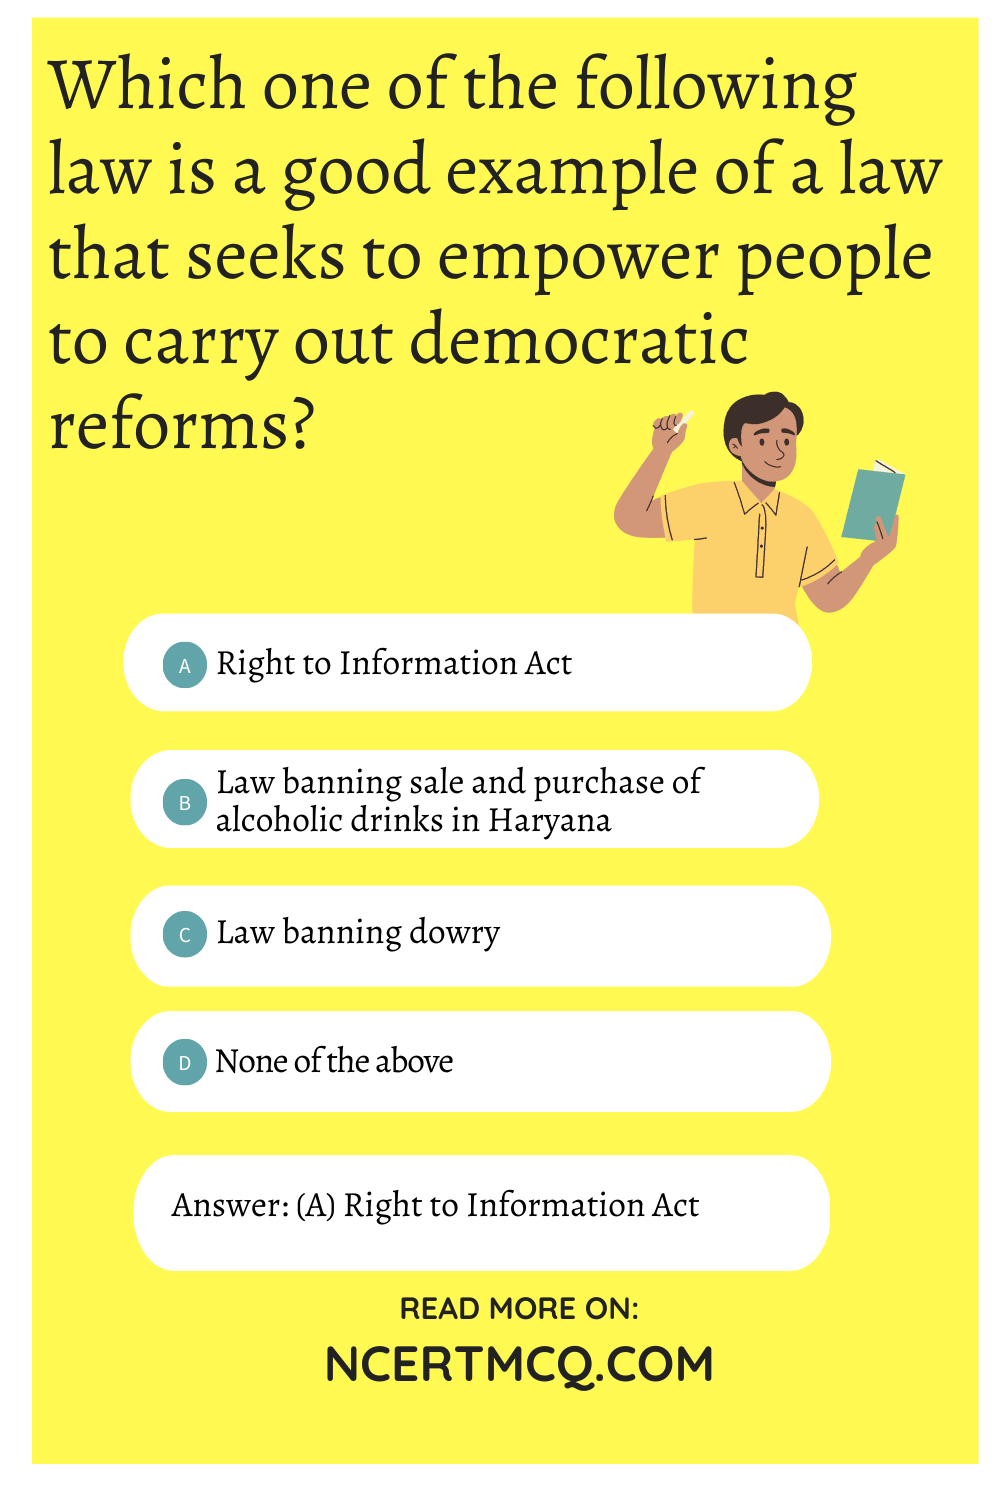 Which one of the following law is a good example of a law that seeks to empower people to carry out democratic reforms?